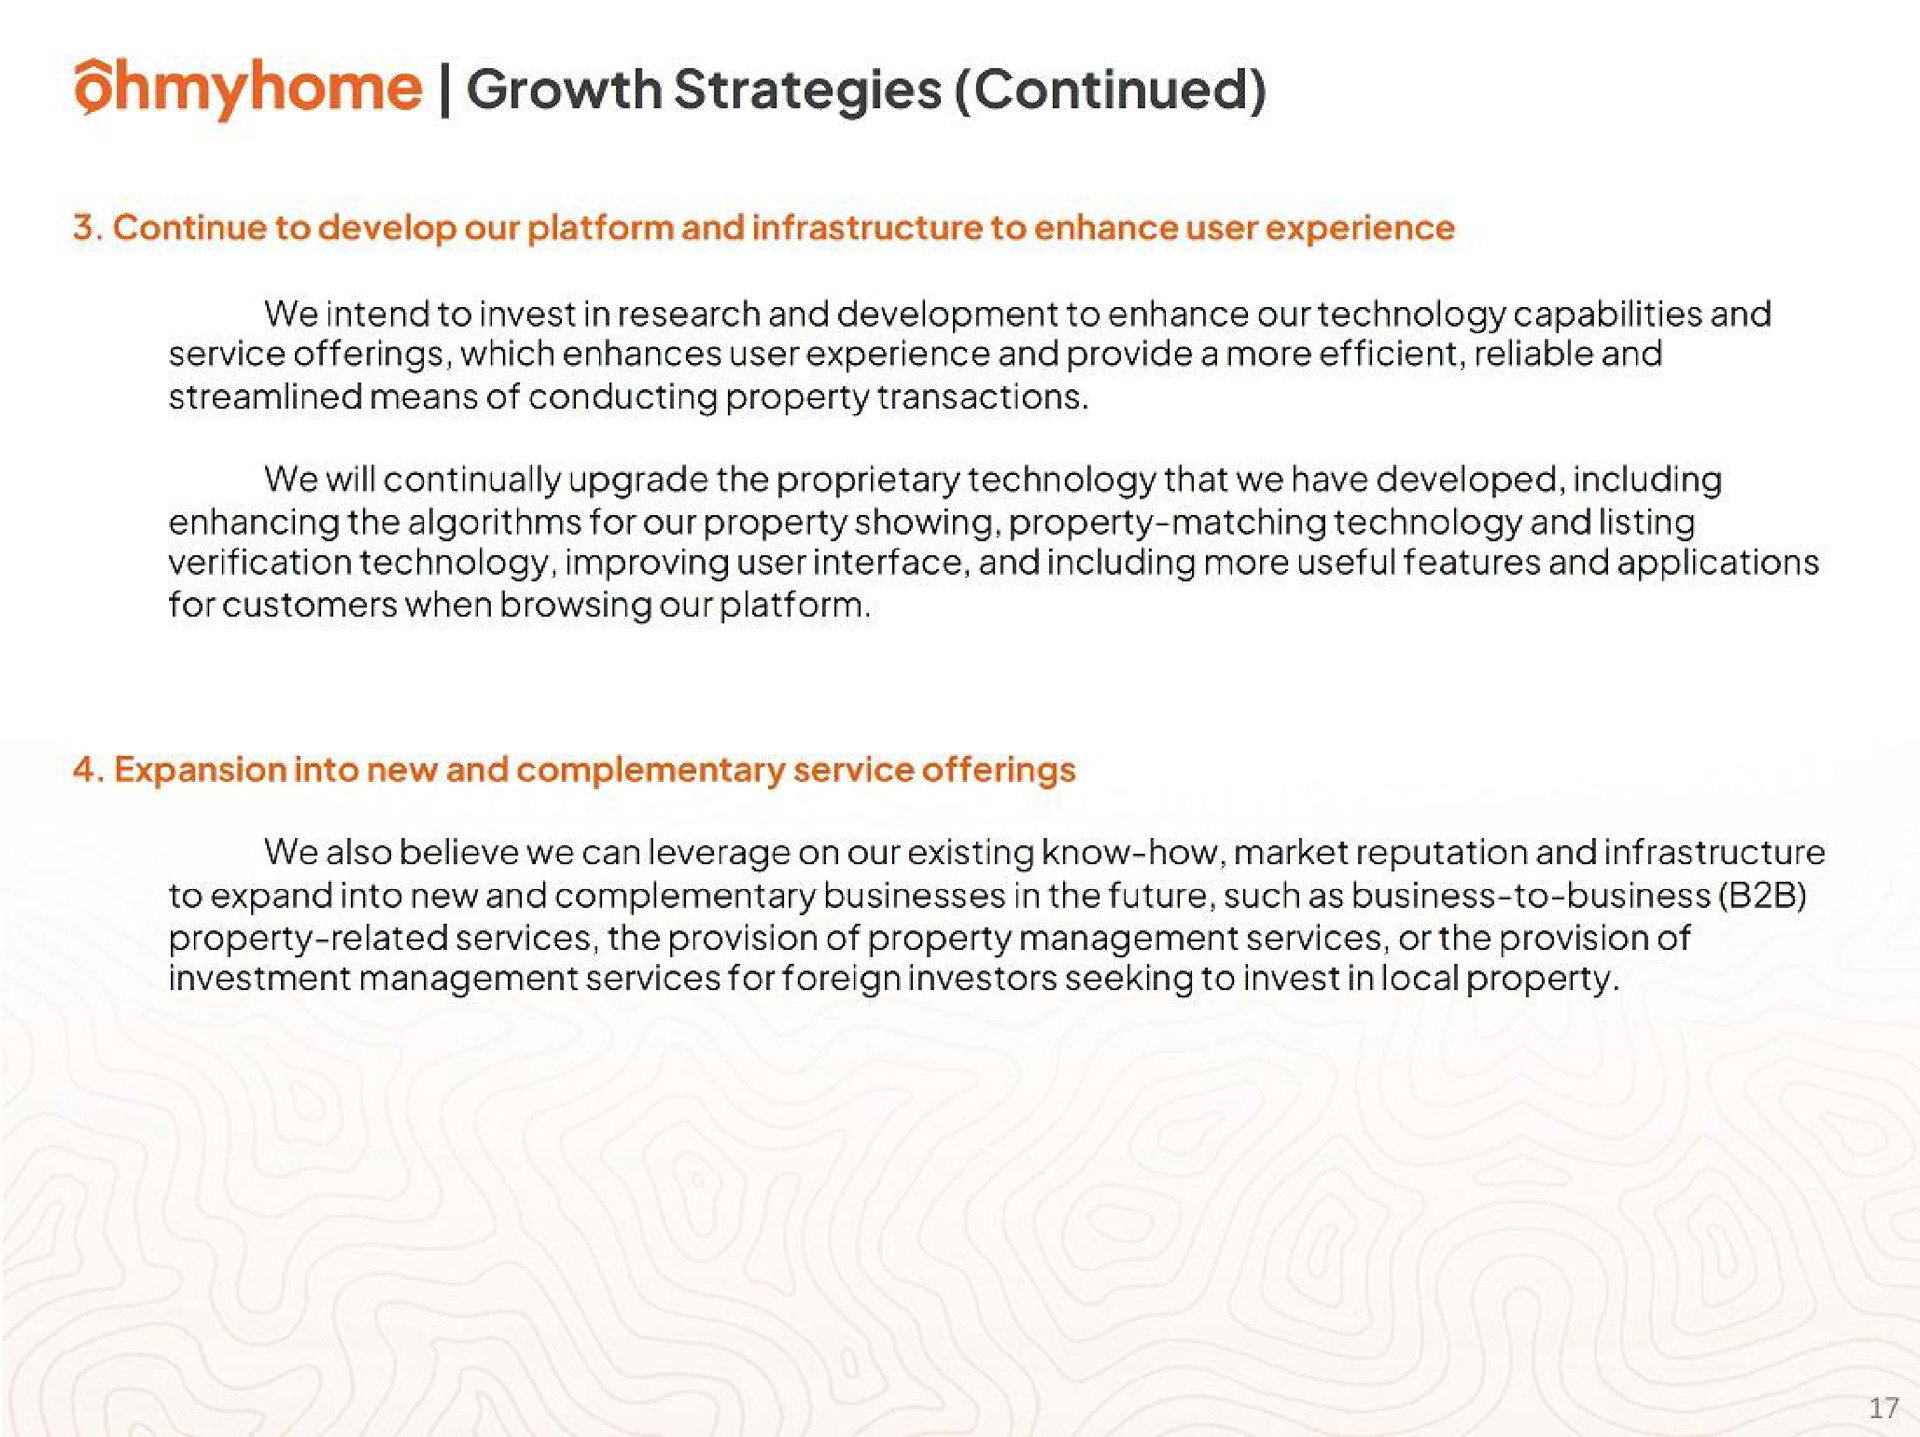 growth strategies continued | Ohmyhome